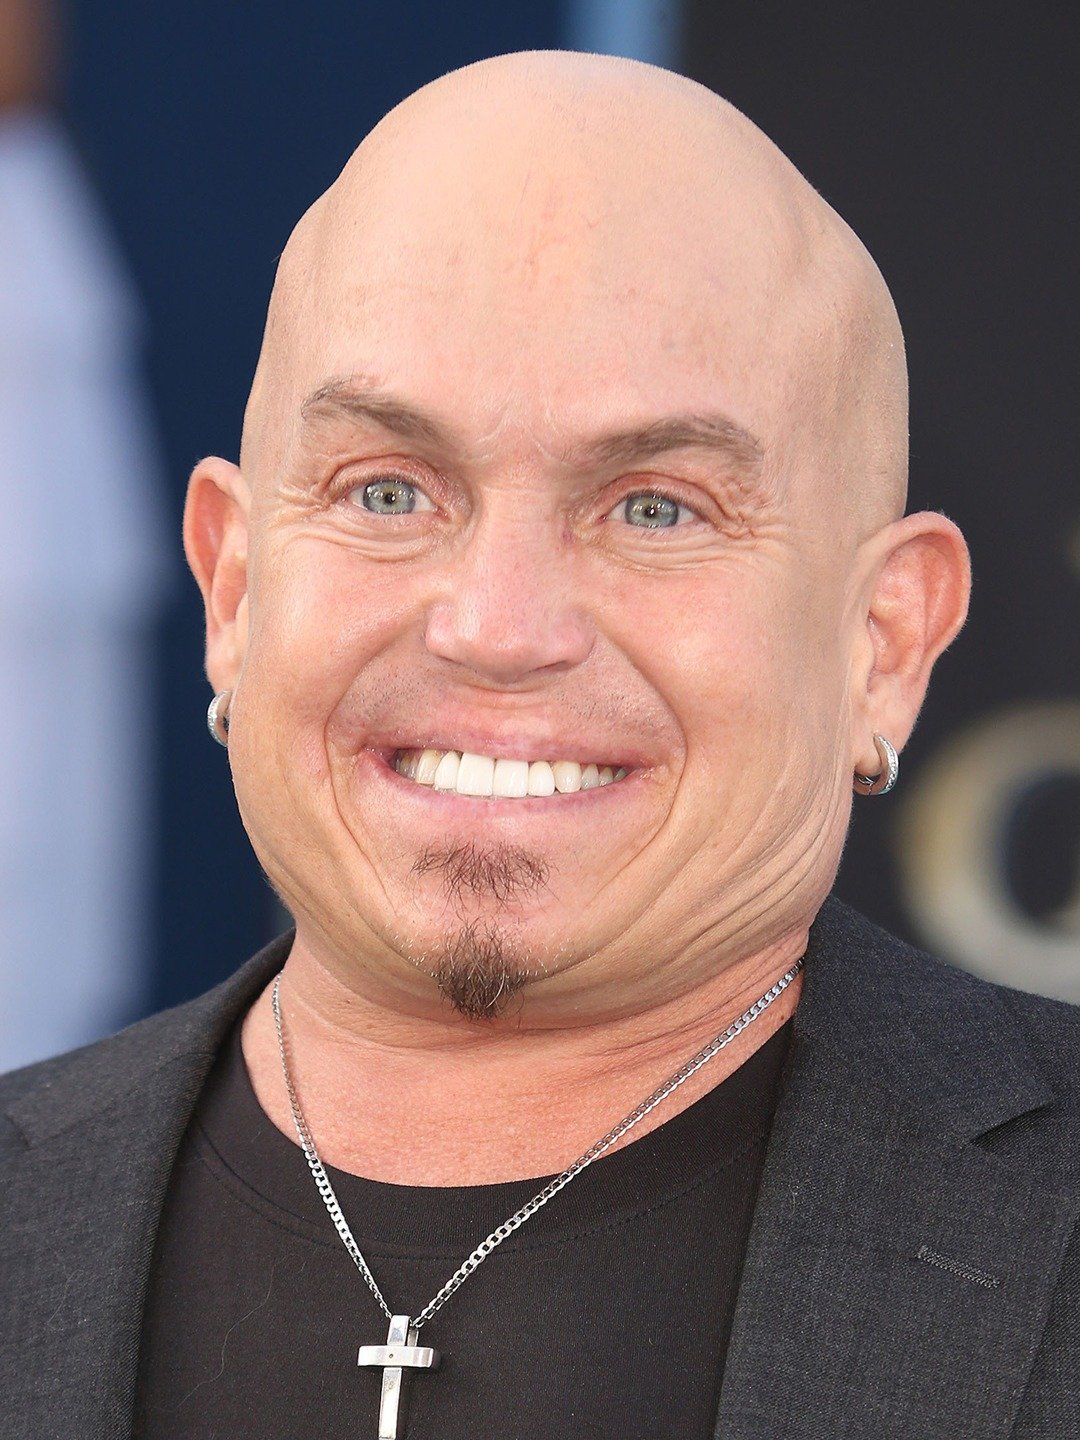 How tall is Martin Klebba?